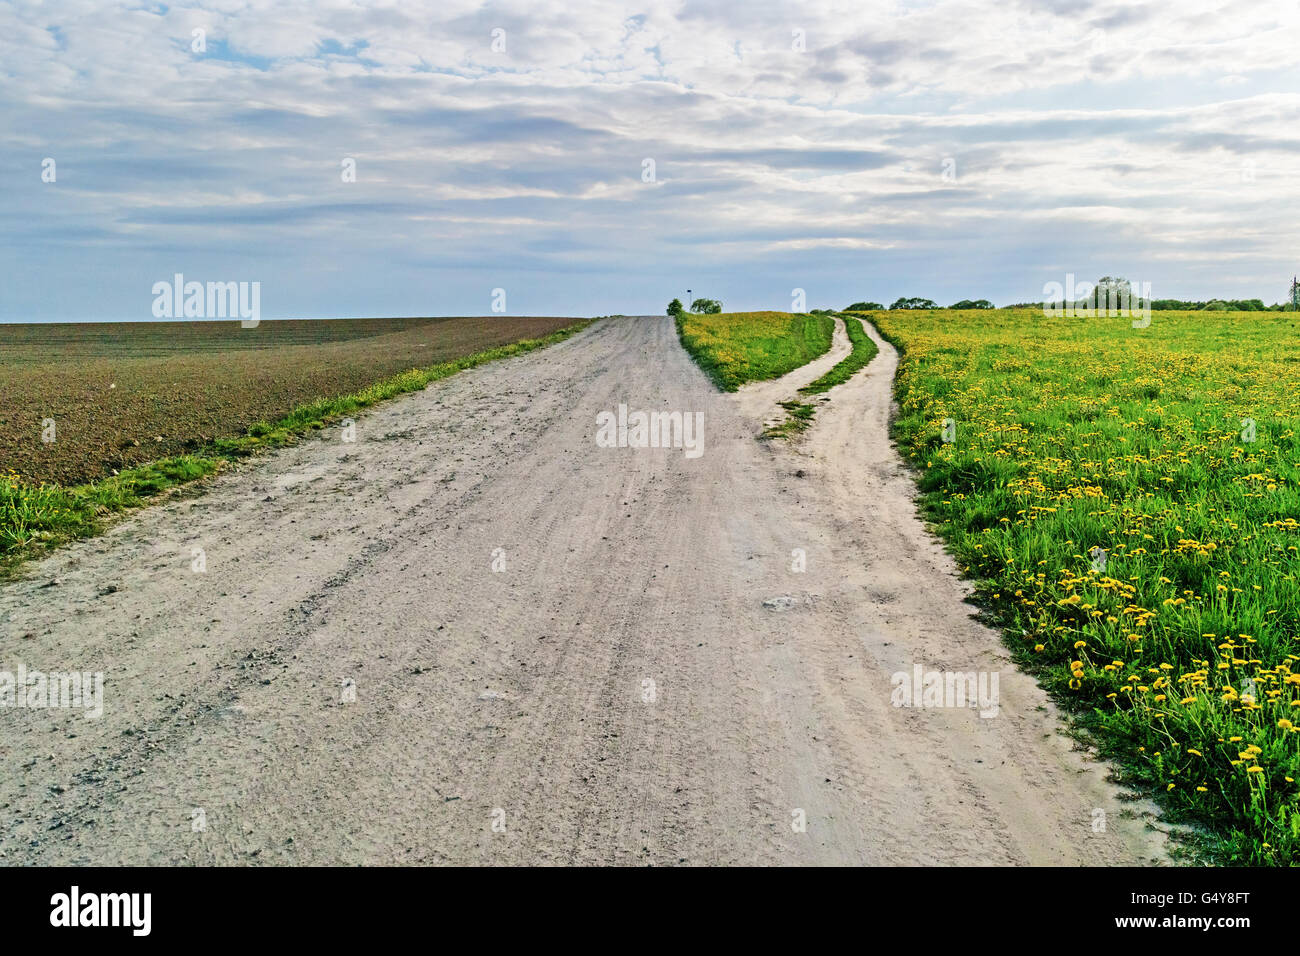 Ground road through agricultural fields.Along the road plowed brown fields and green grass fields. Stock Photo